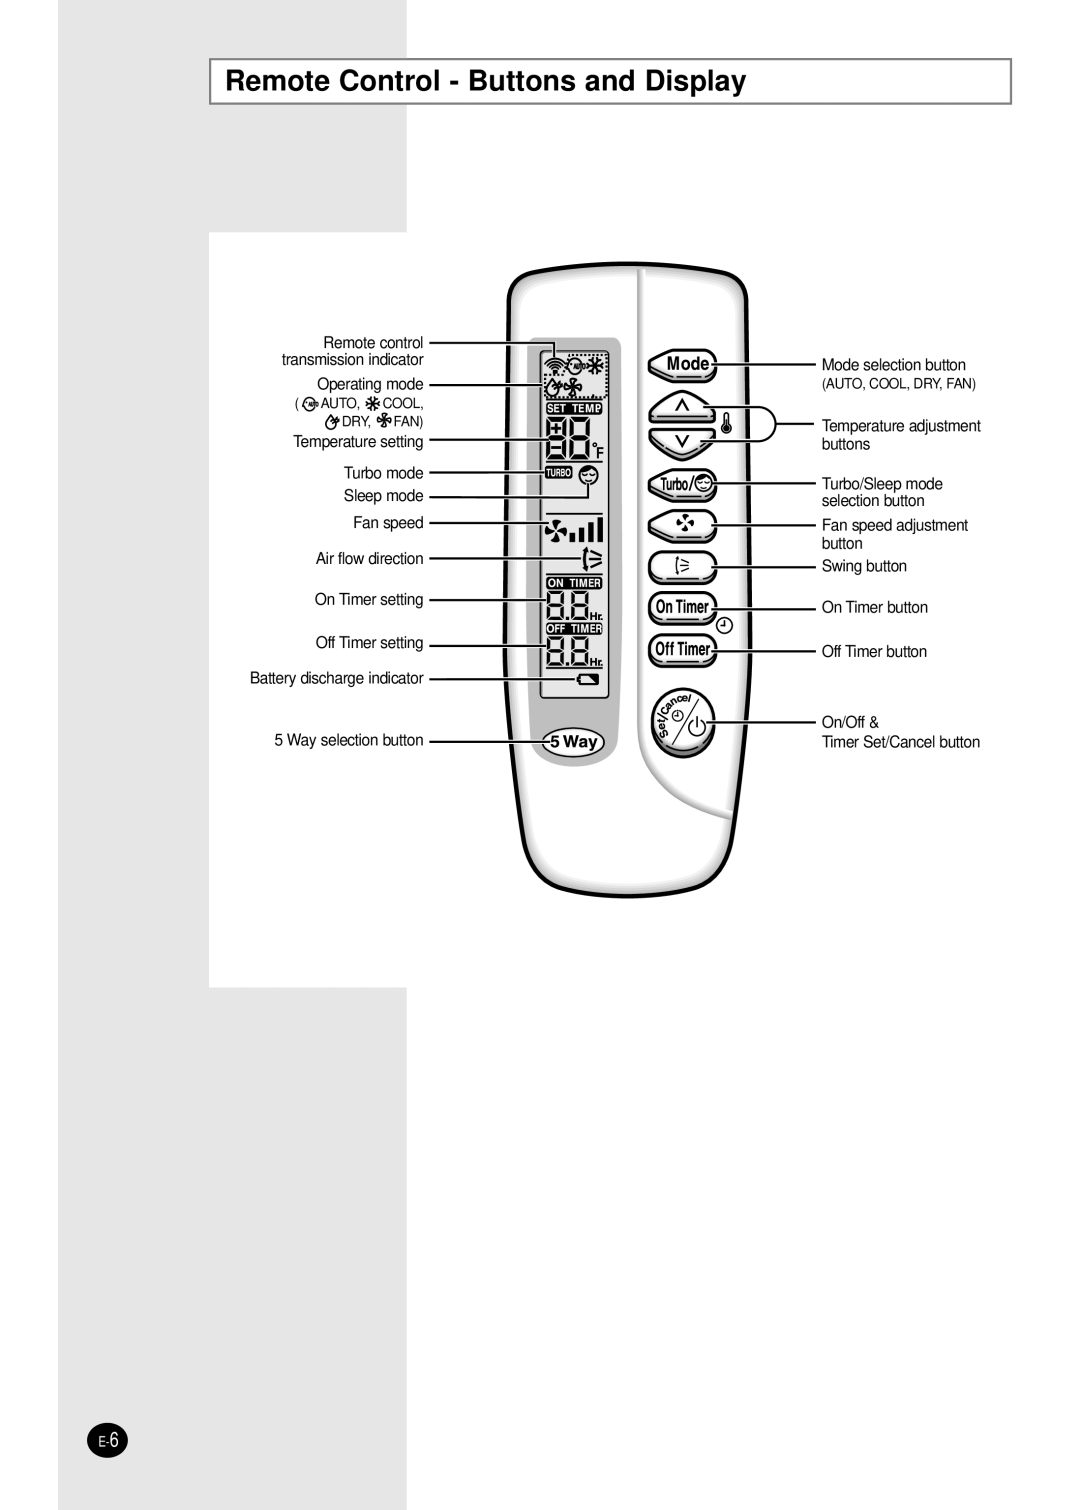 Samsung US07A5(A6)MA, US12AA(AB)MC, US12A5(A6)MC, US18A5(A6)RC, US18A9(A0)RCD Remote Control - Buttons and Display 